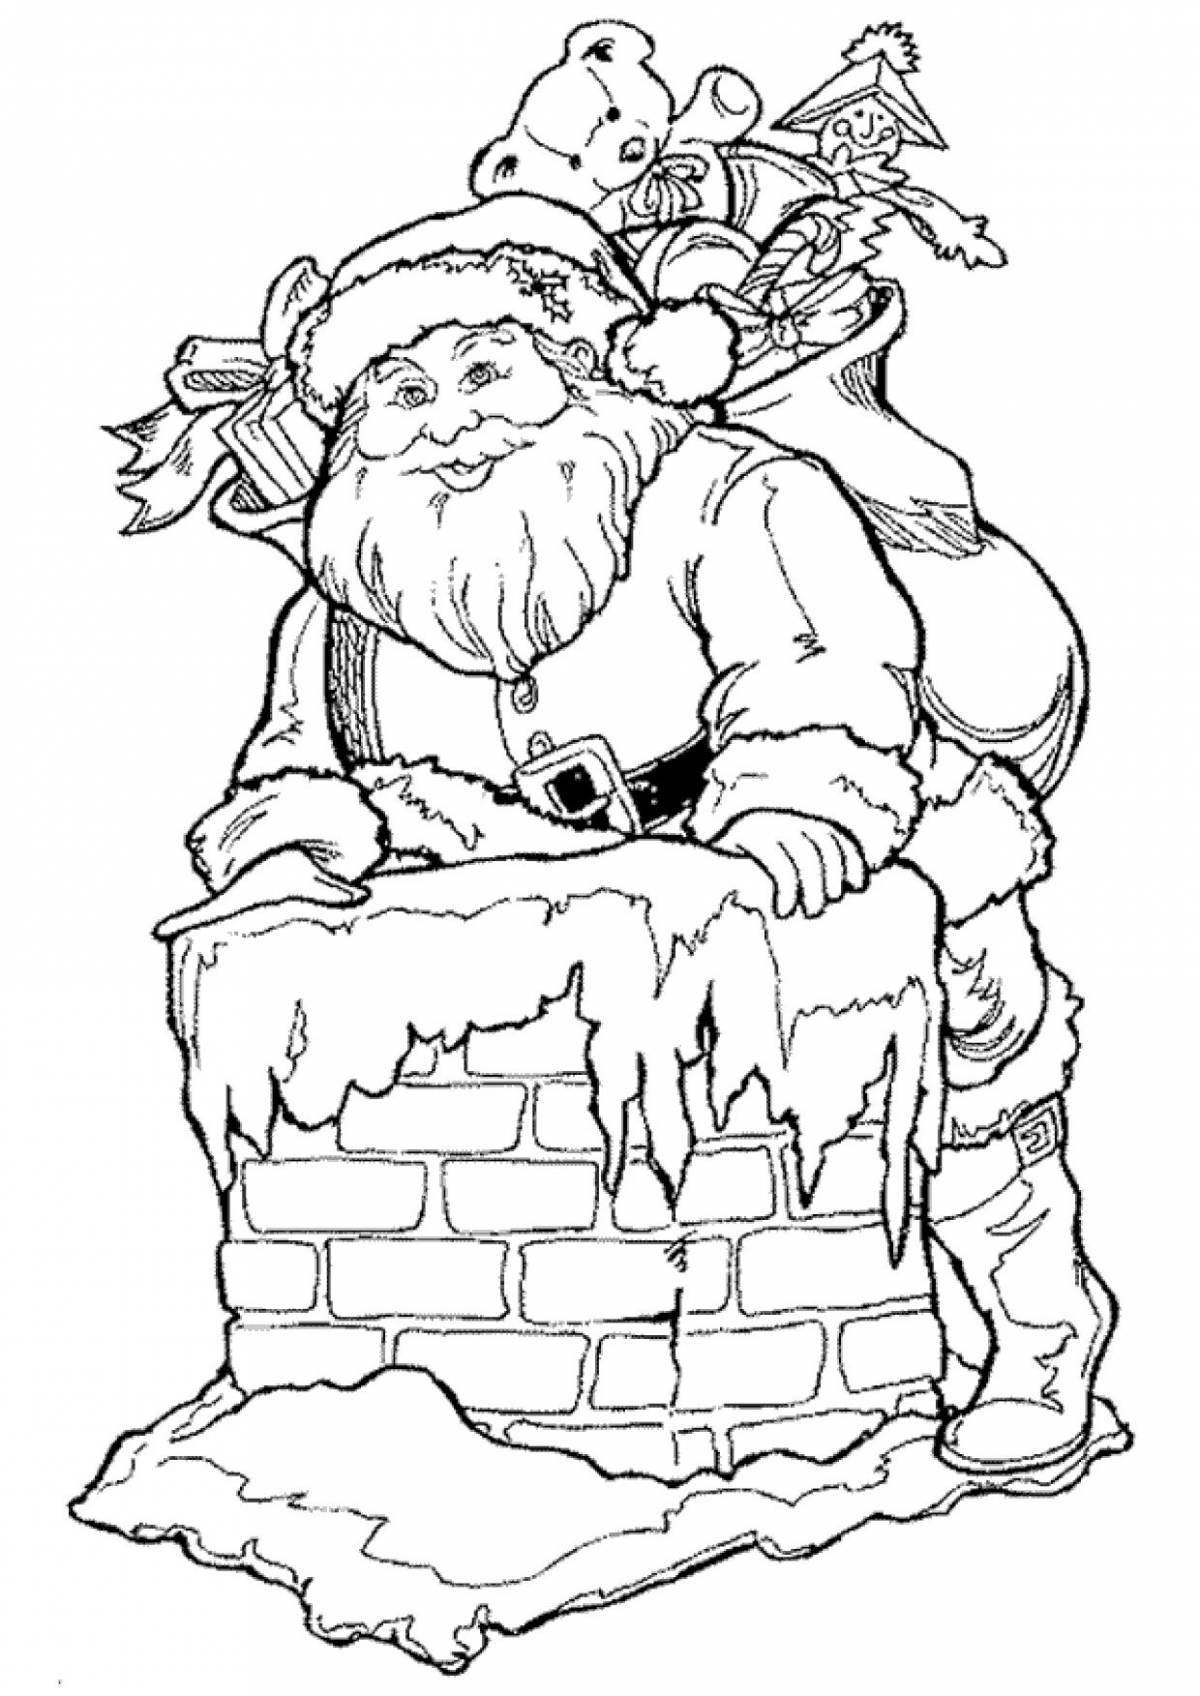 Glorious governor frost coloring page